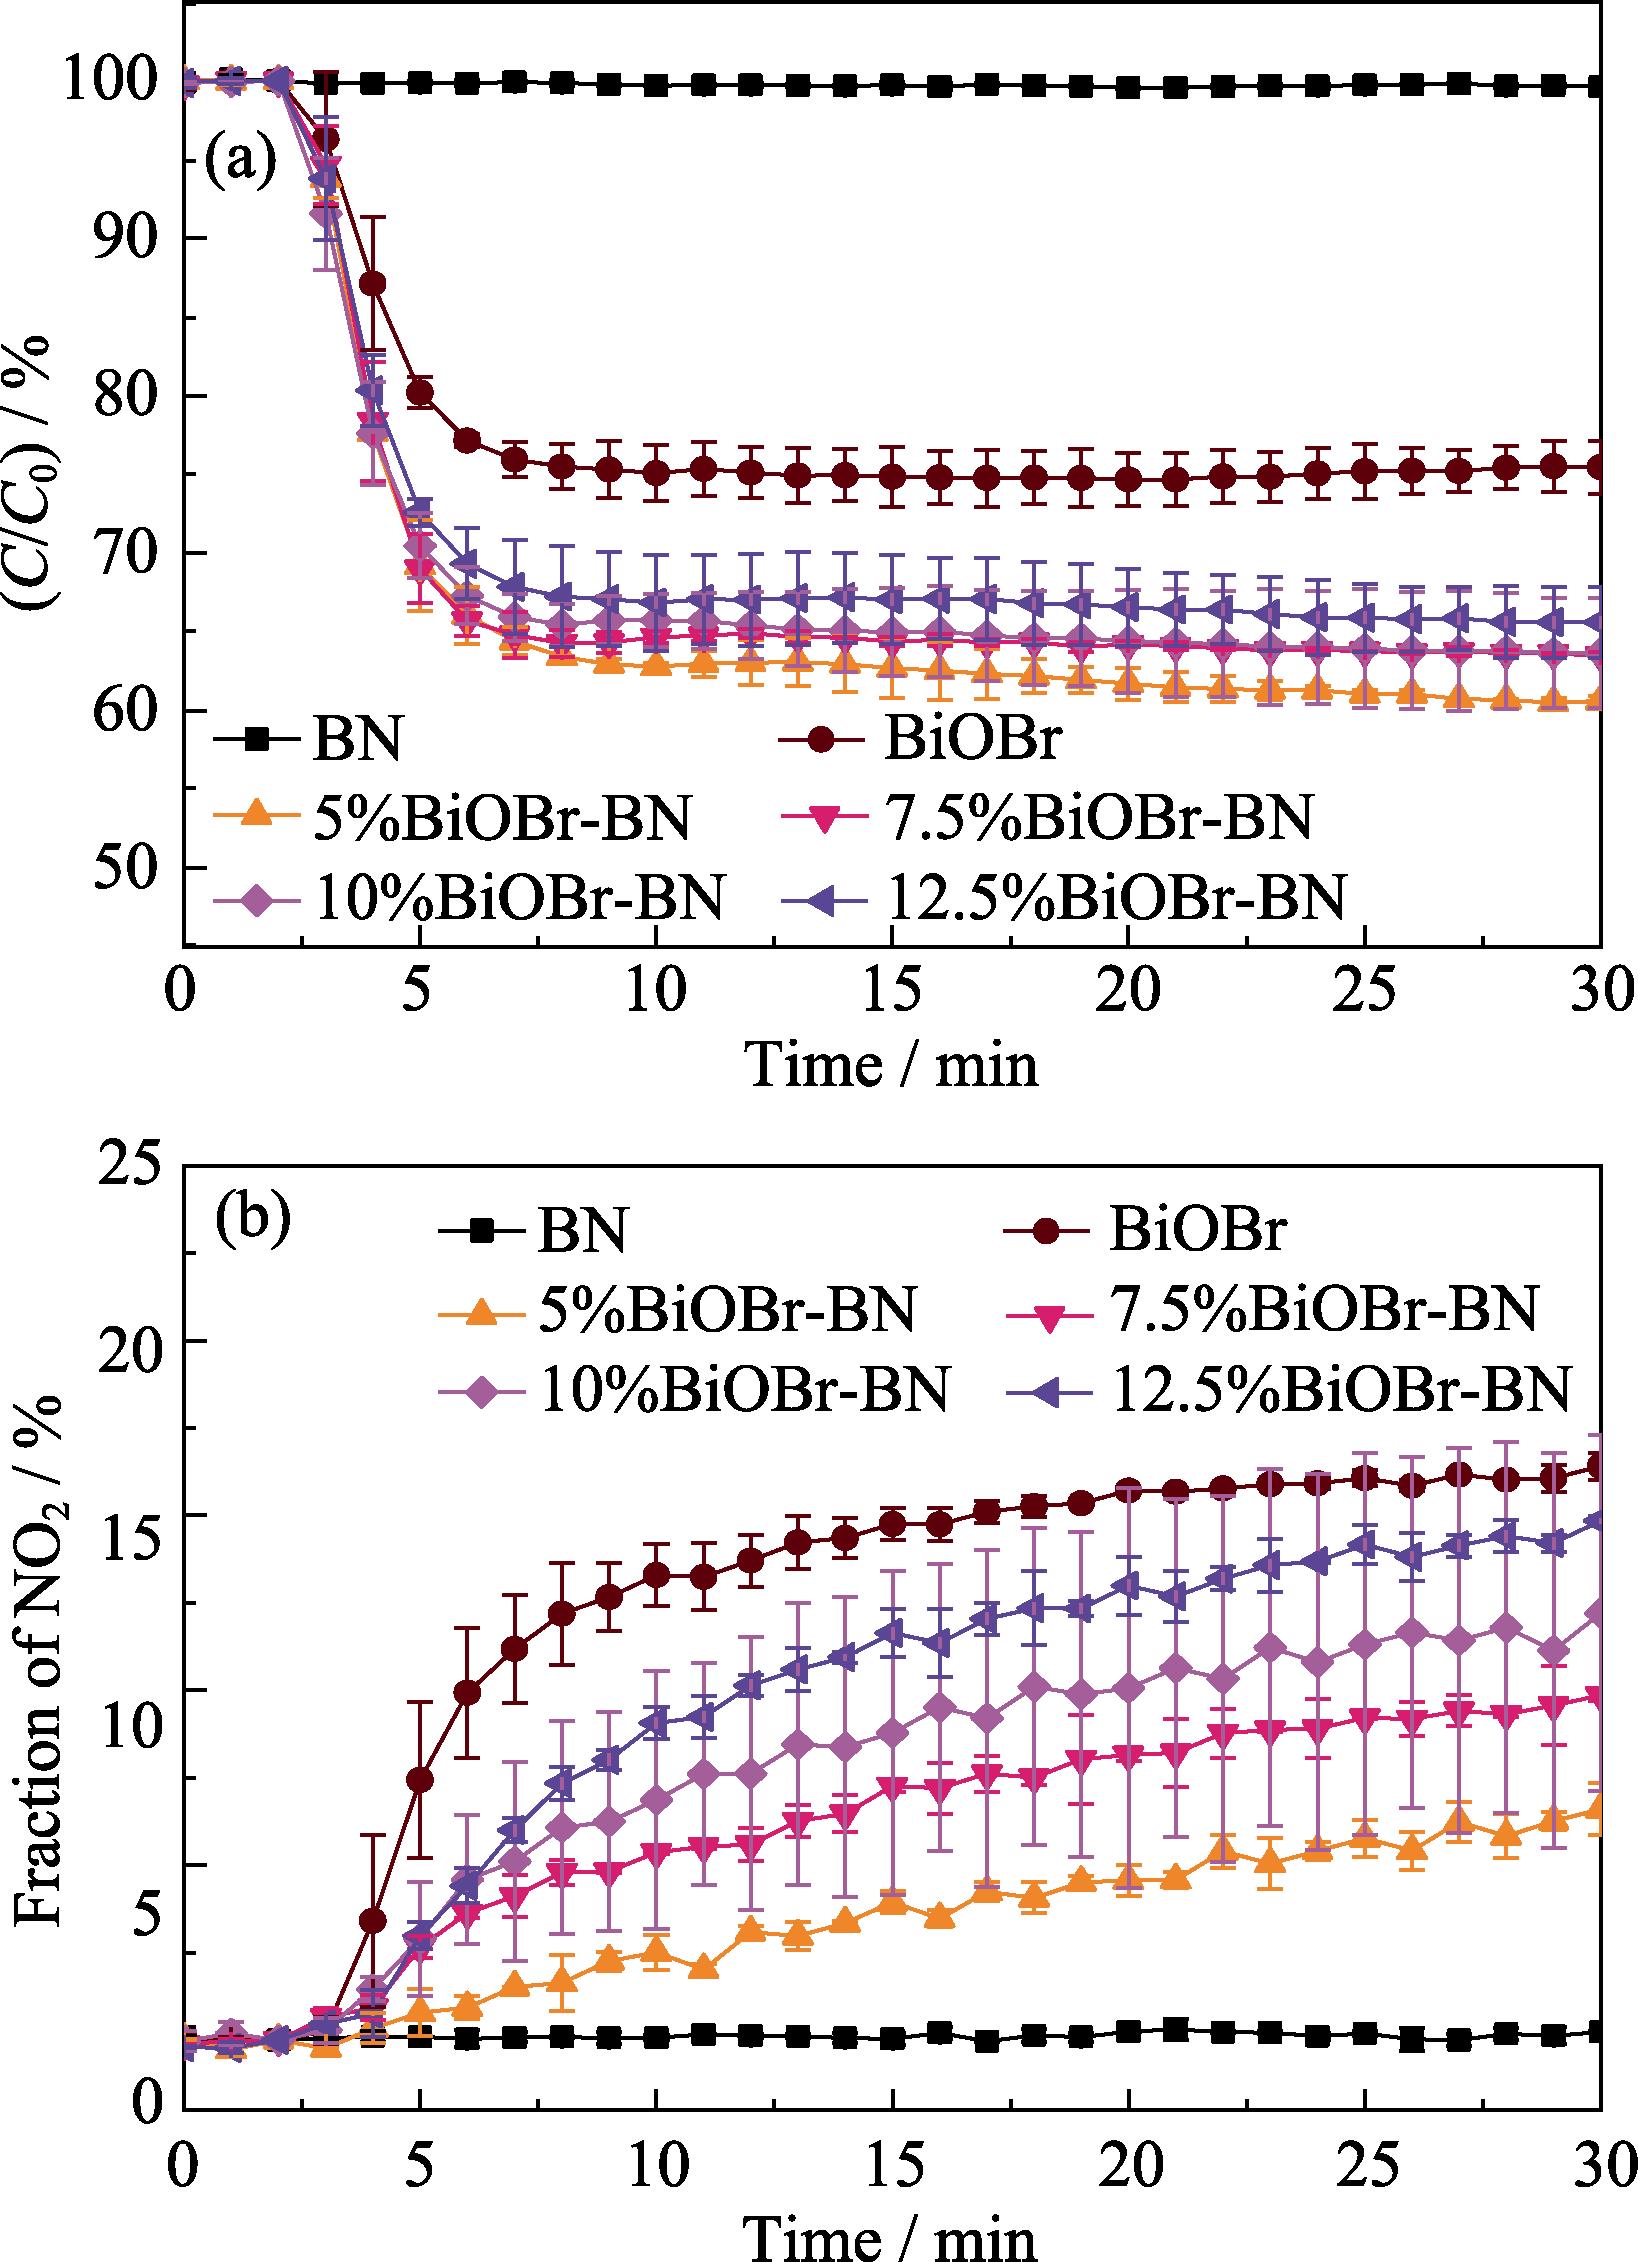 Photocatalytic activities of BN, BiOBr and BiOBr-BN nanocomposites for NO oxidation (a) and NO2 generation (b) under visible light irradiation